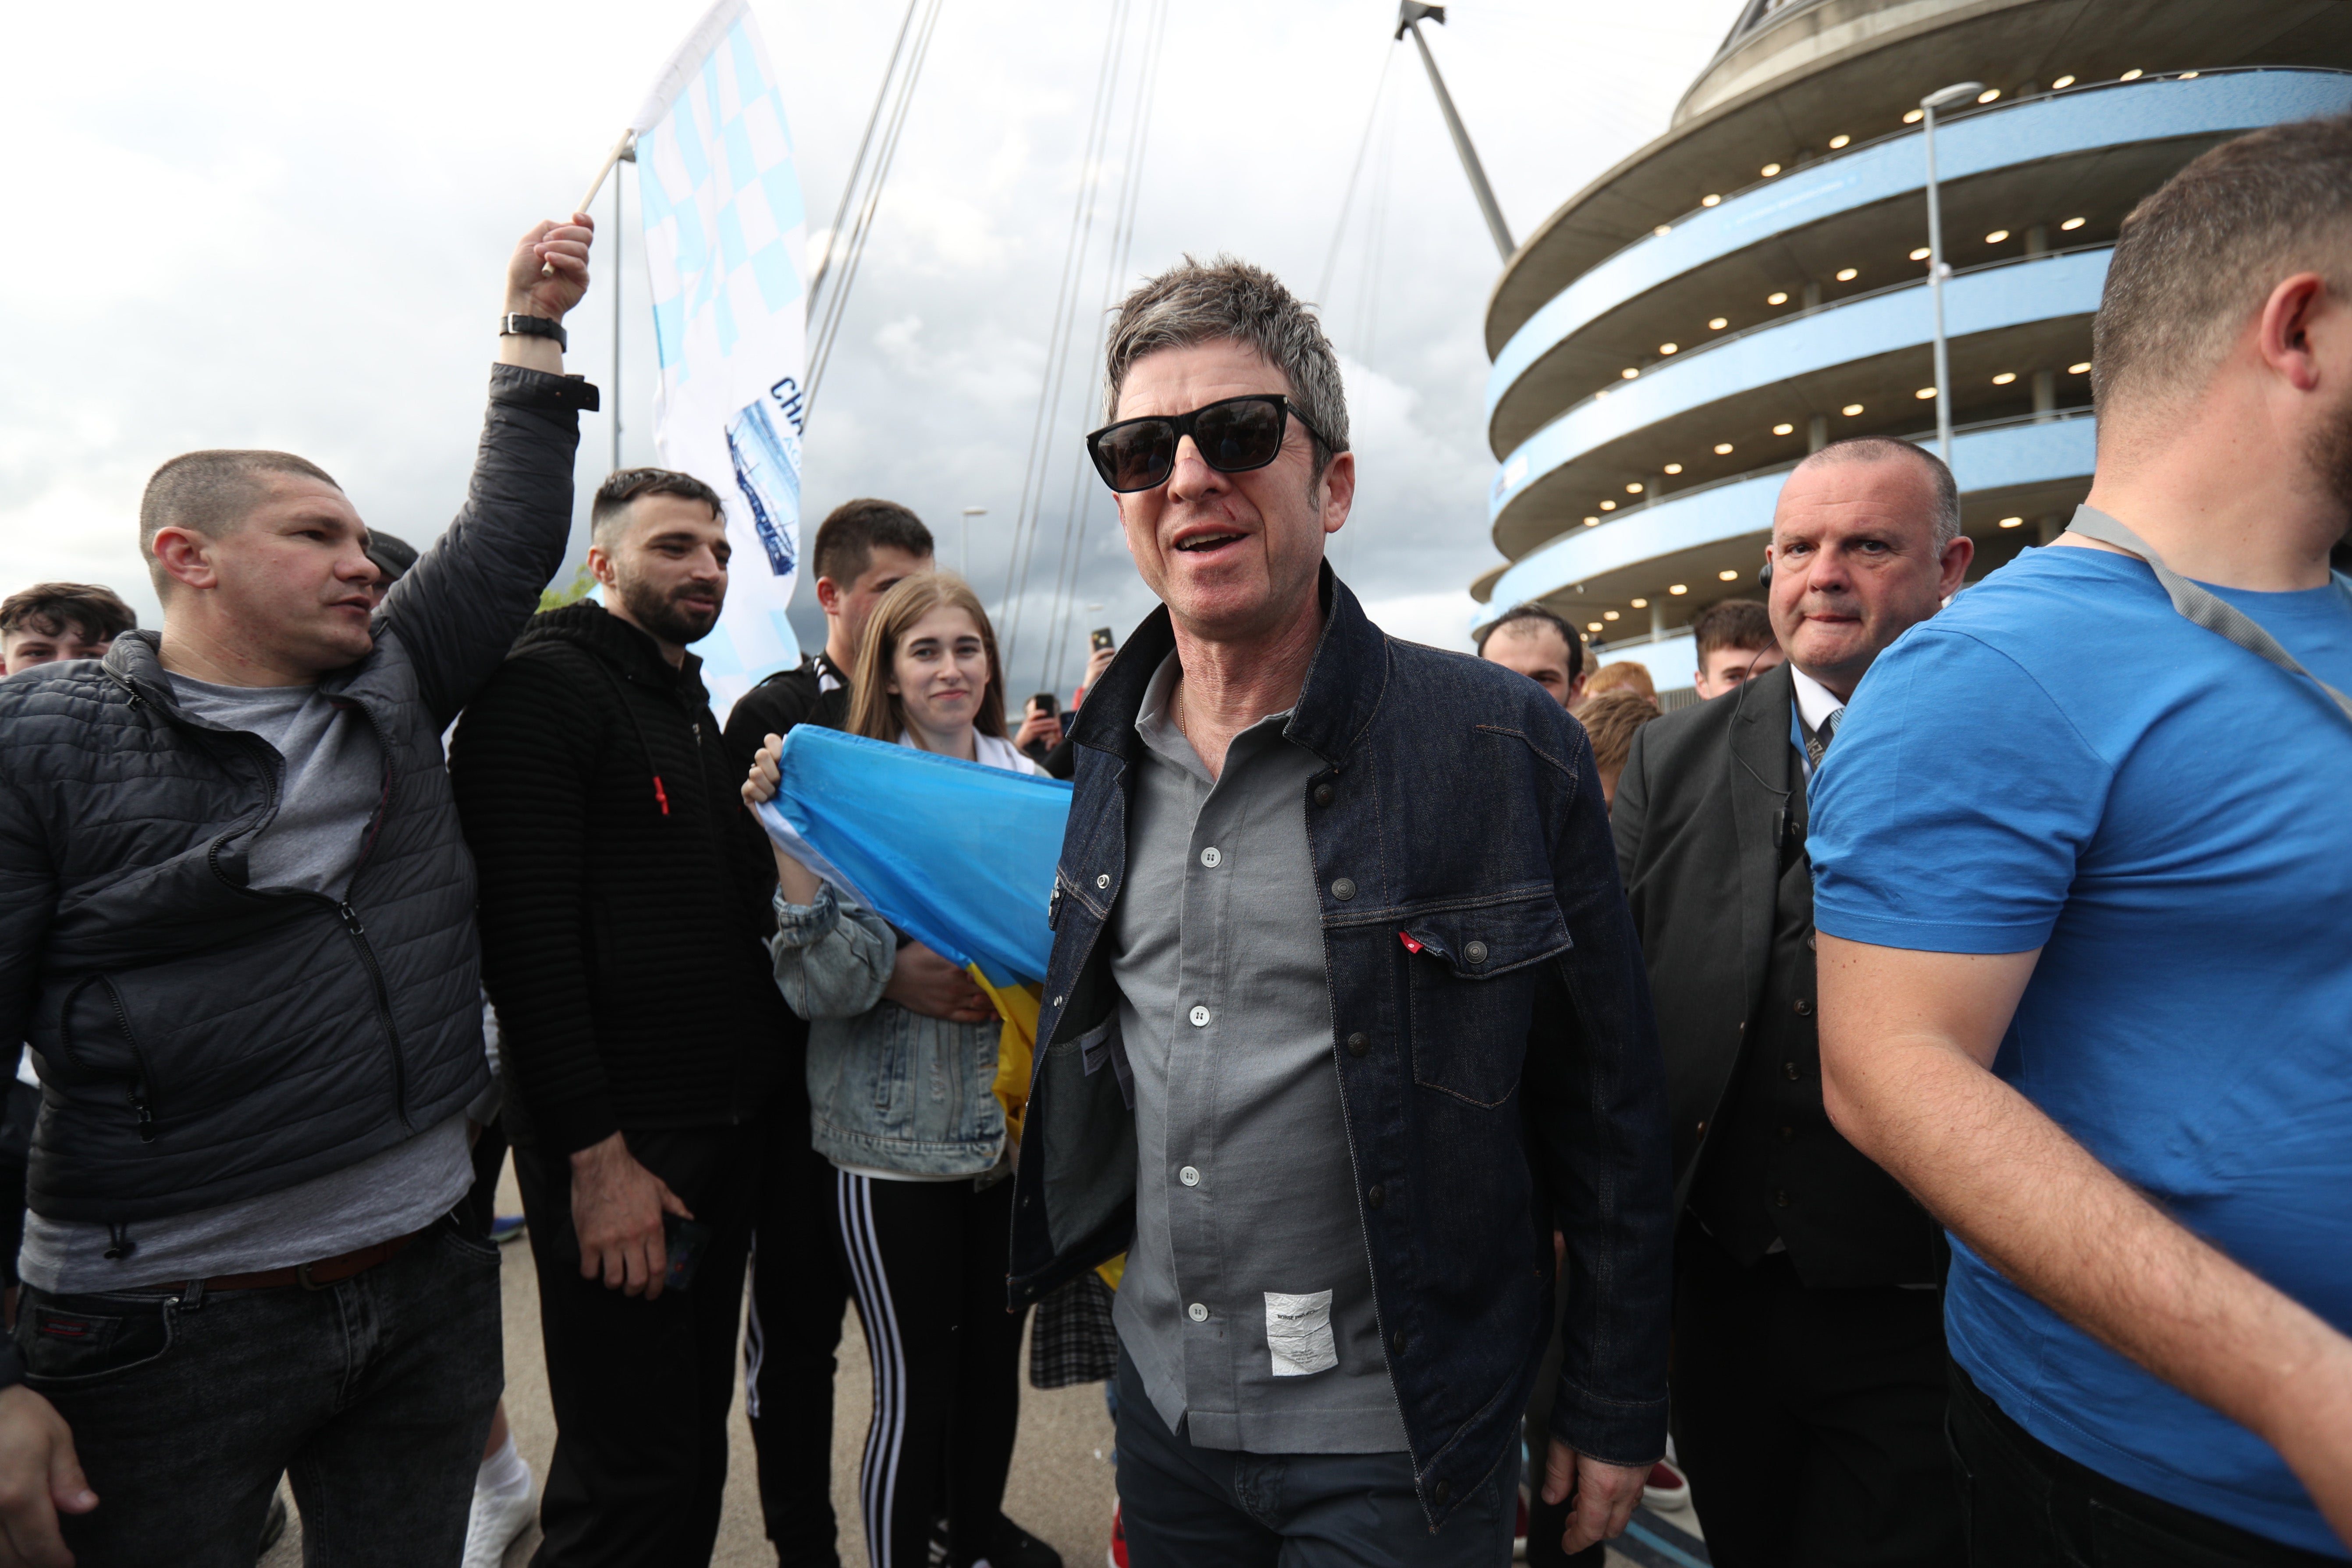 Noel Gallagher was injured as he celebrated Manchester City’s Premier League title win